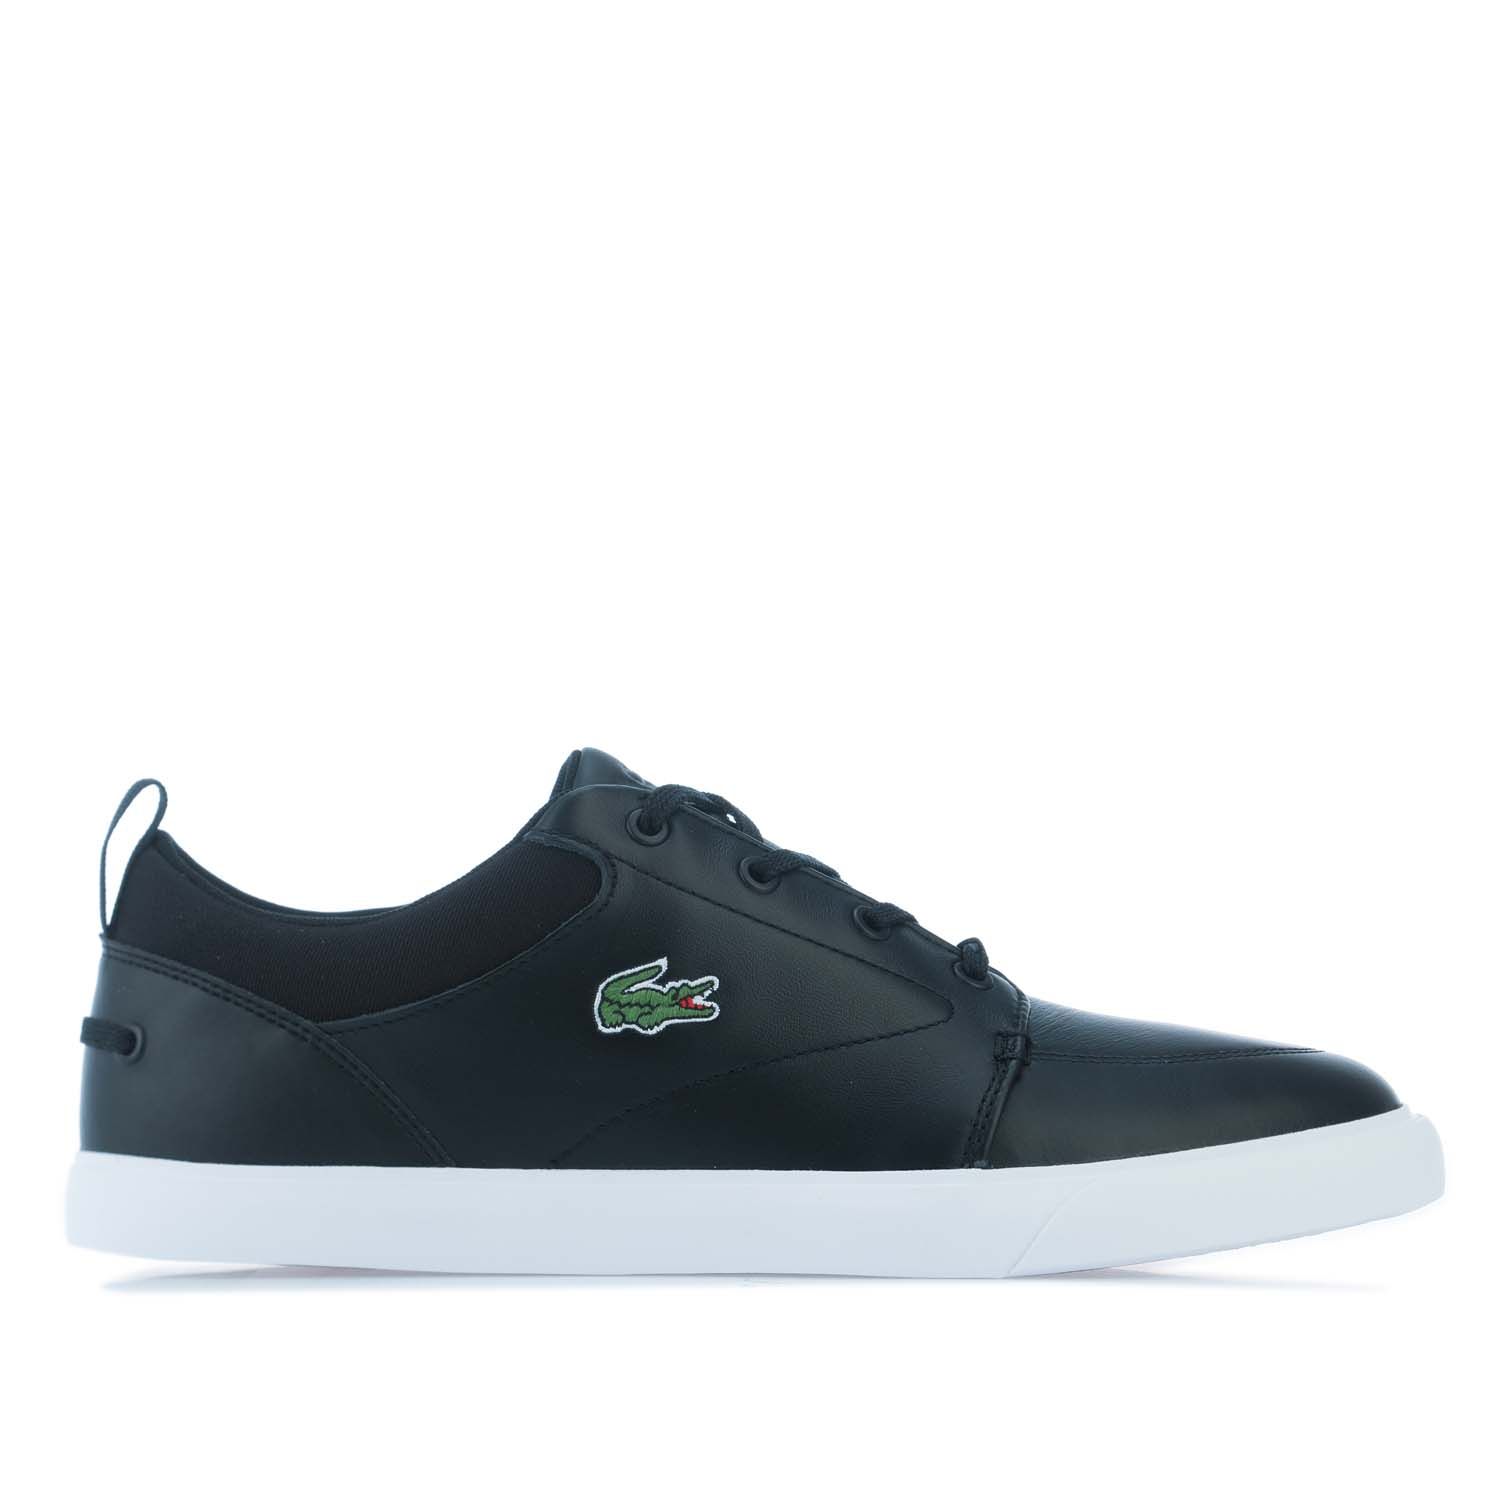 Black-White Mens Bayliss Trainers - Get The